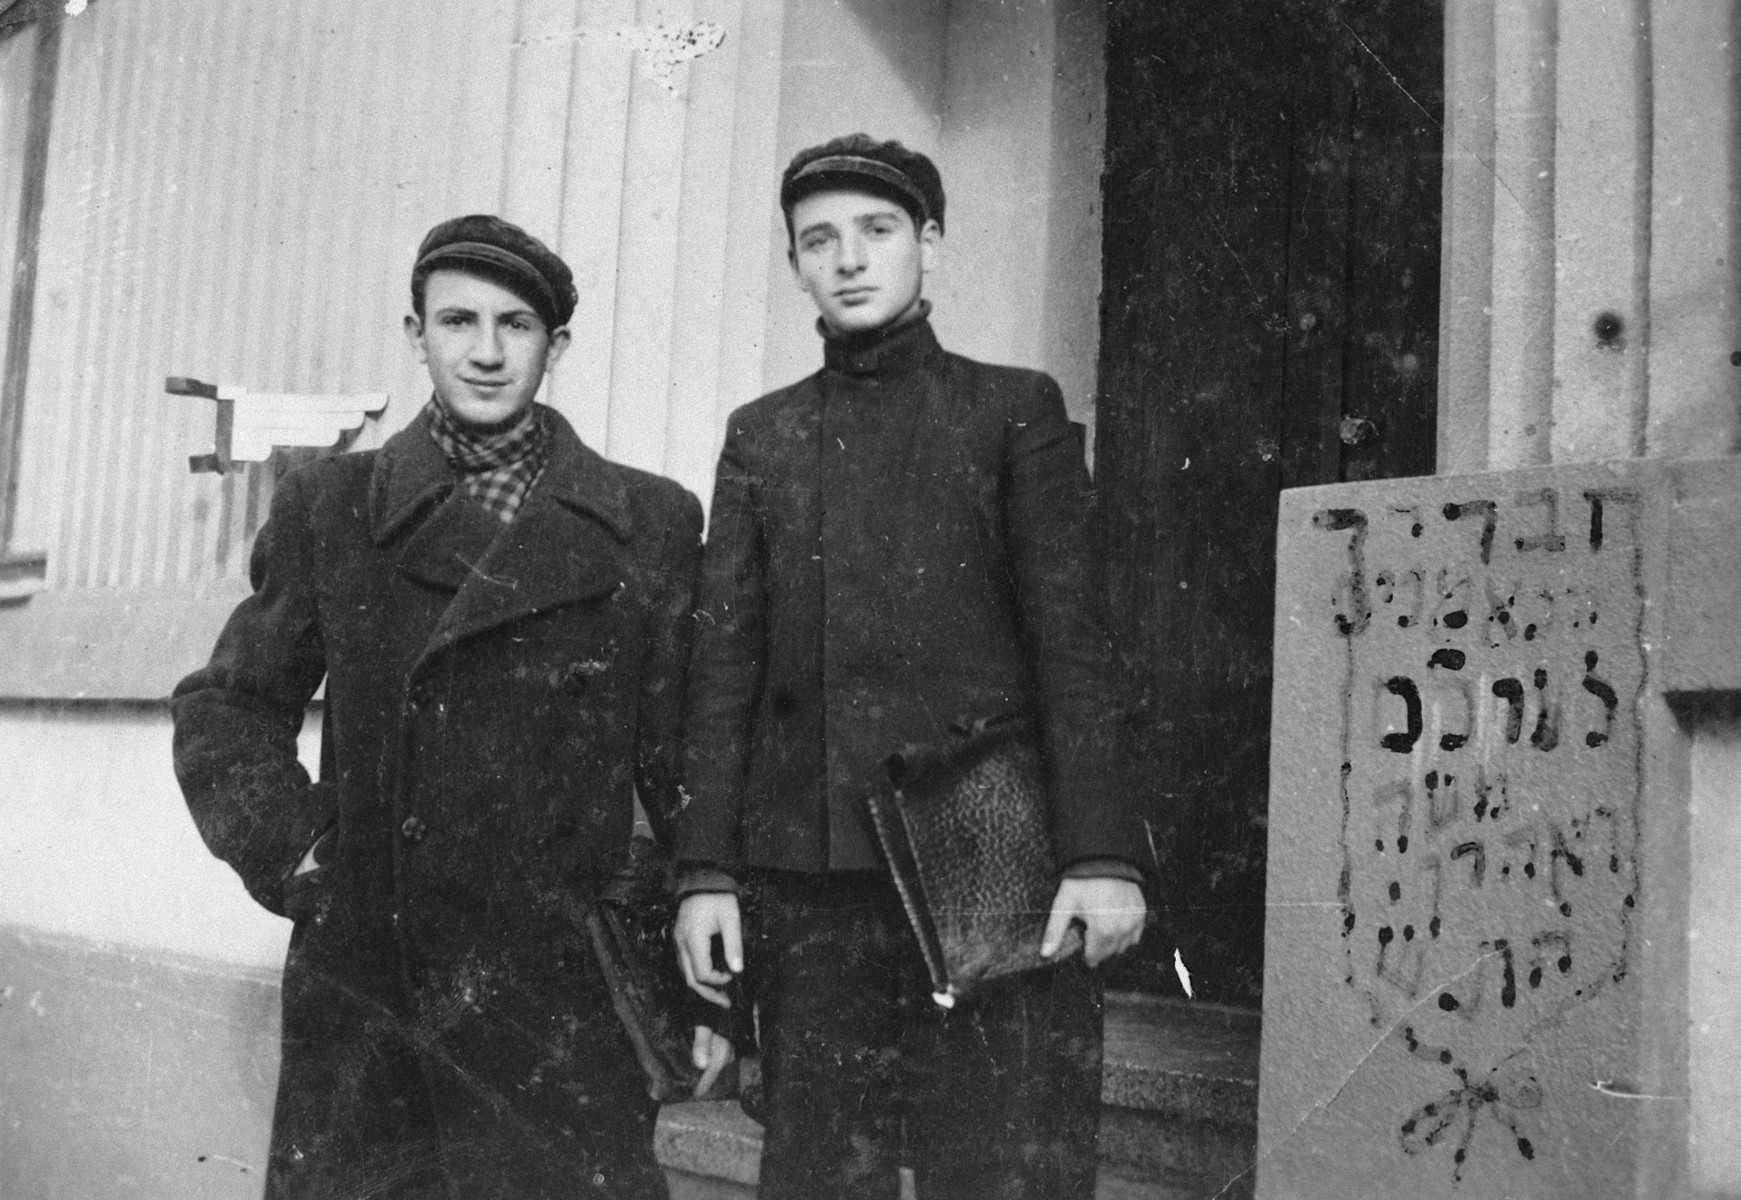 Close-up portrait of two Lithuanian Jewish teenagers.

Pictured are Moshe Strazdanski and Aharon Nun.